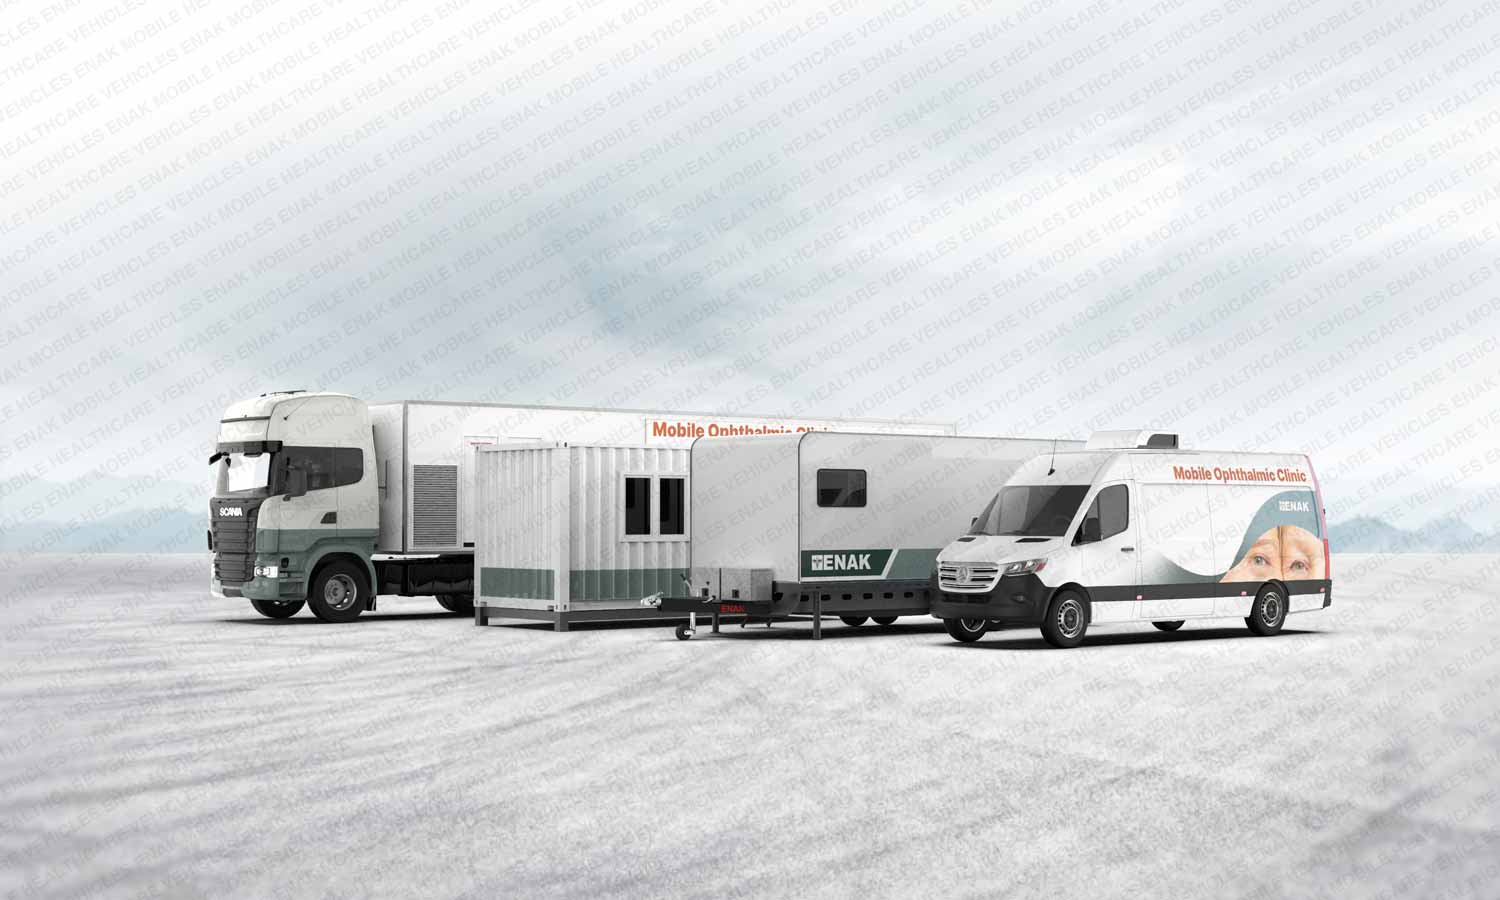 Mobile Ophtalmic Clinic